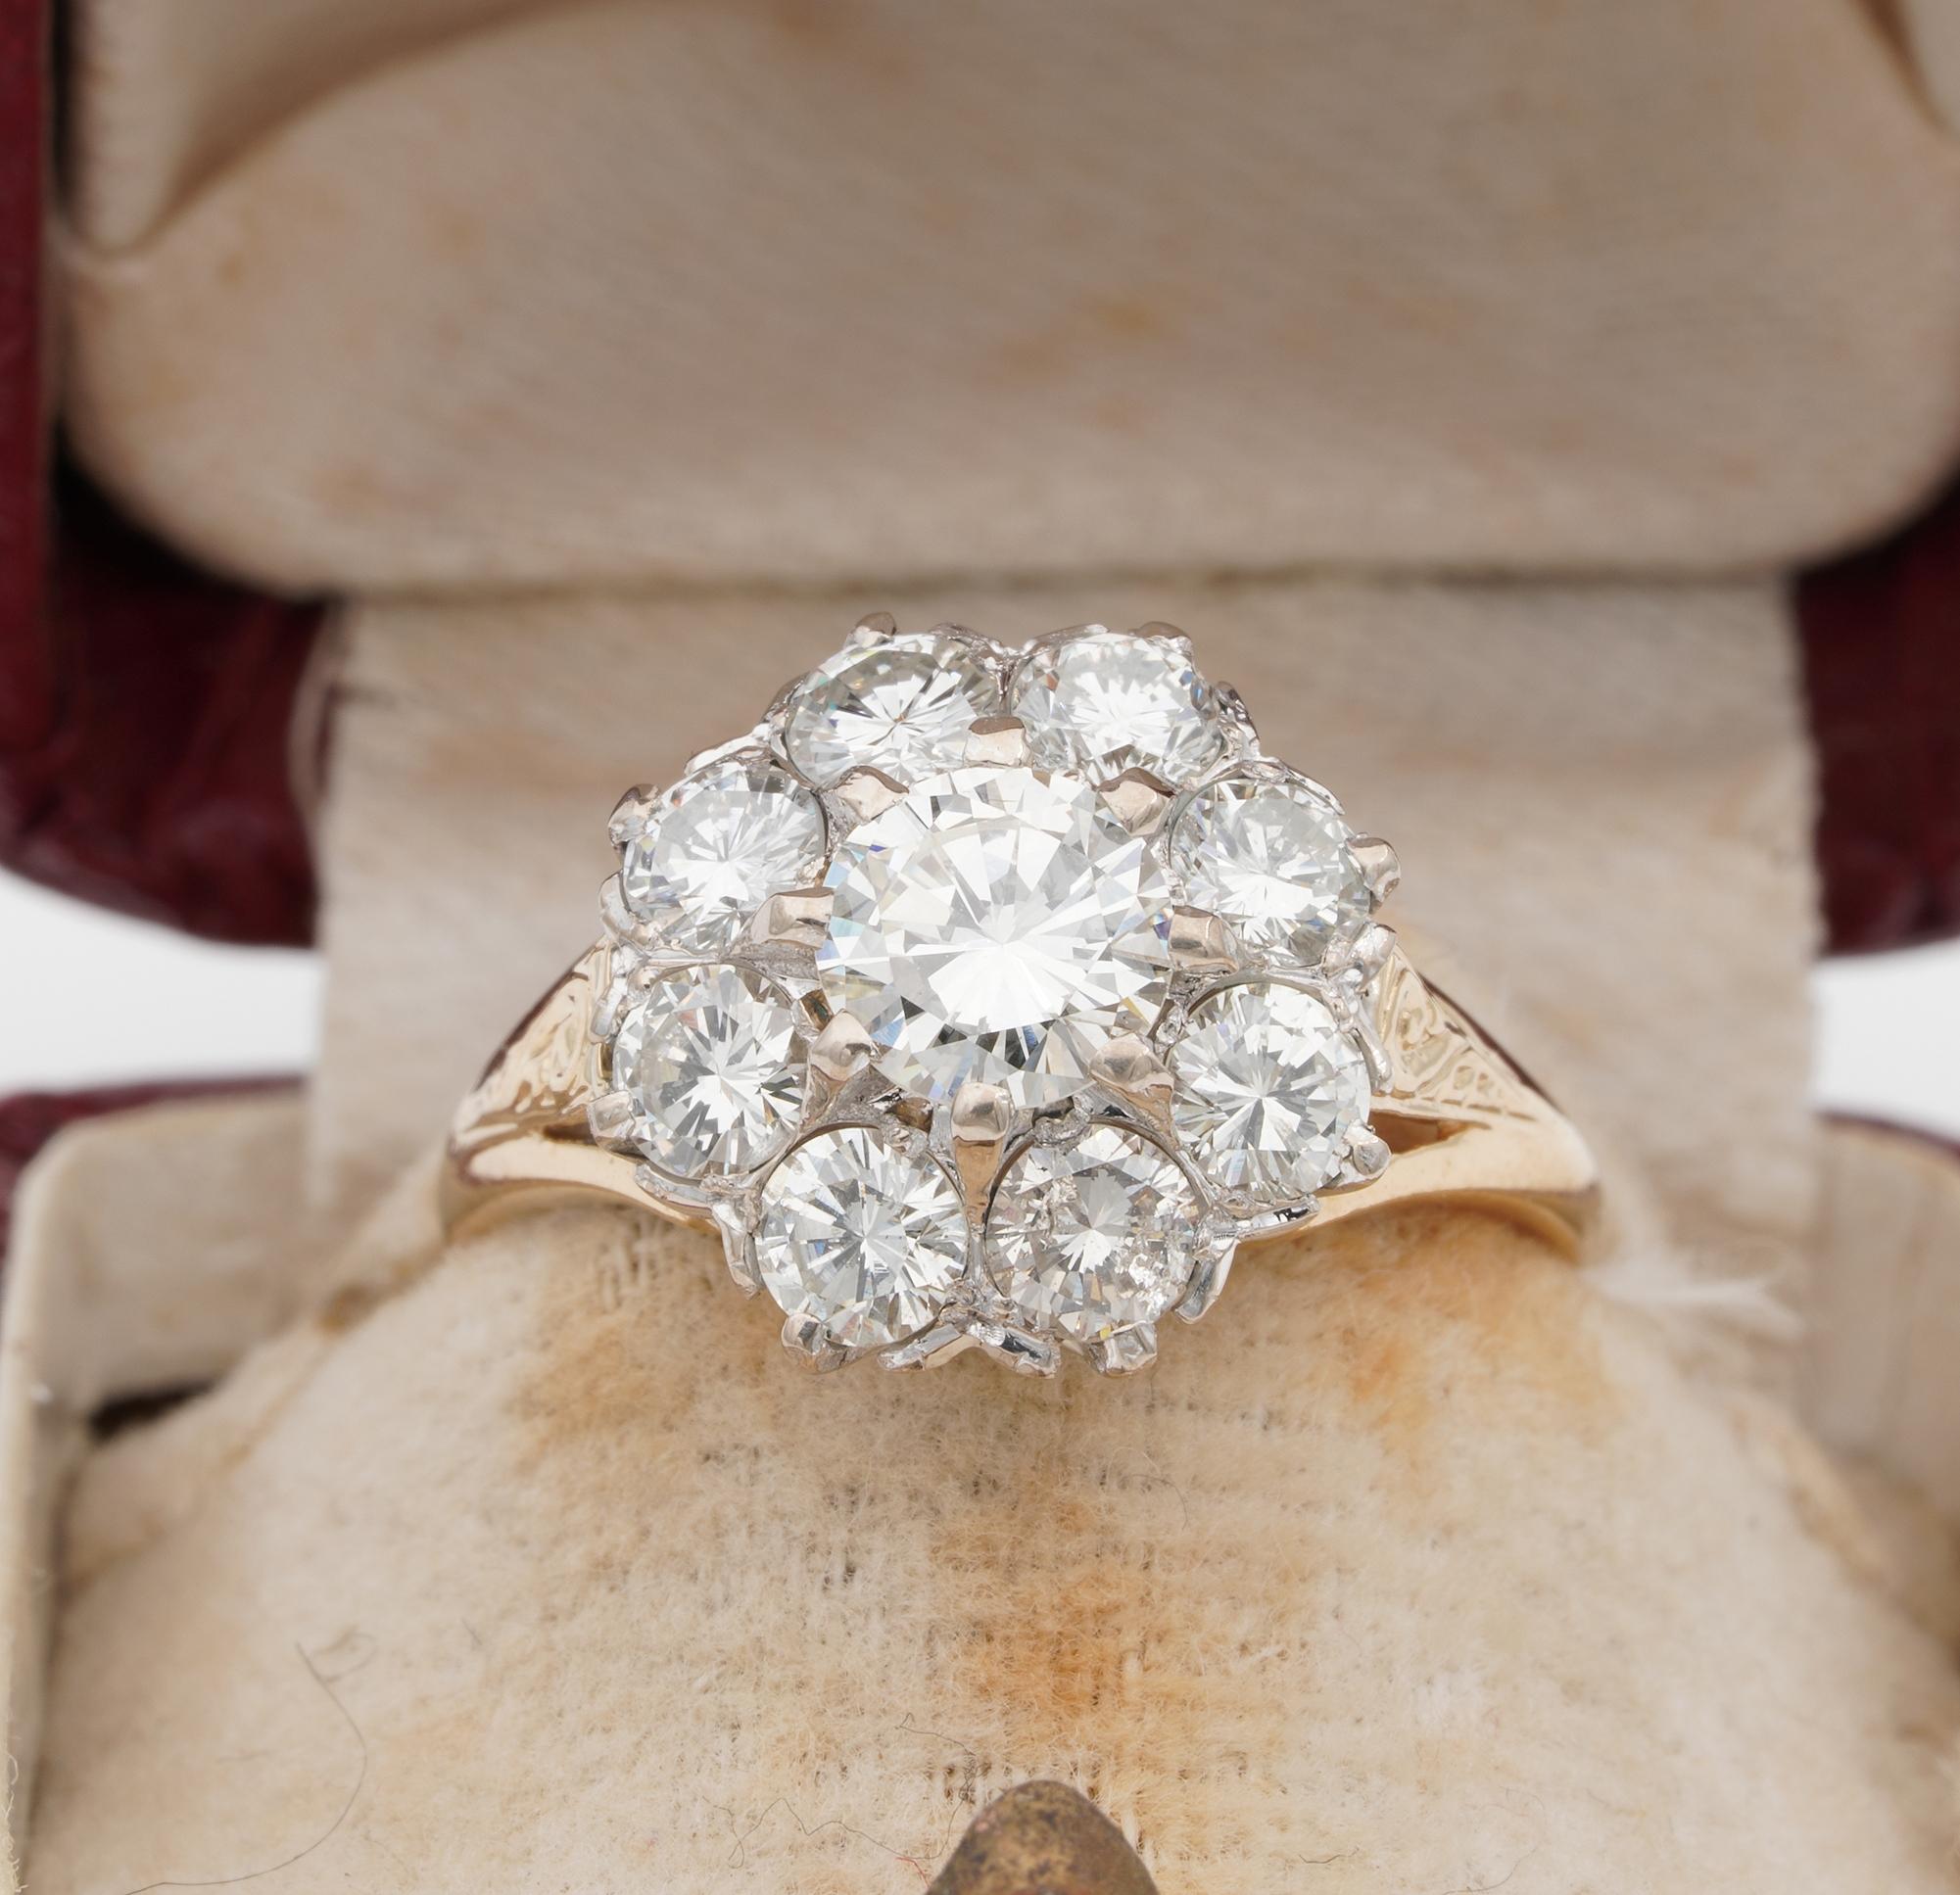 A Statement for Ever

This imposing classy vintage ring dates 1940 ca, suitable for engagement or for life companion
The classy style of diamond cluster in the romantic shape of a daisy, always loved and statement ring for a lifetime
Hand crafted of